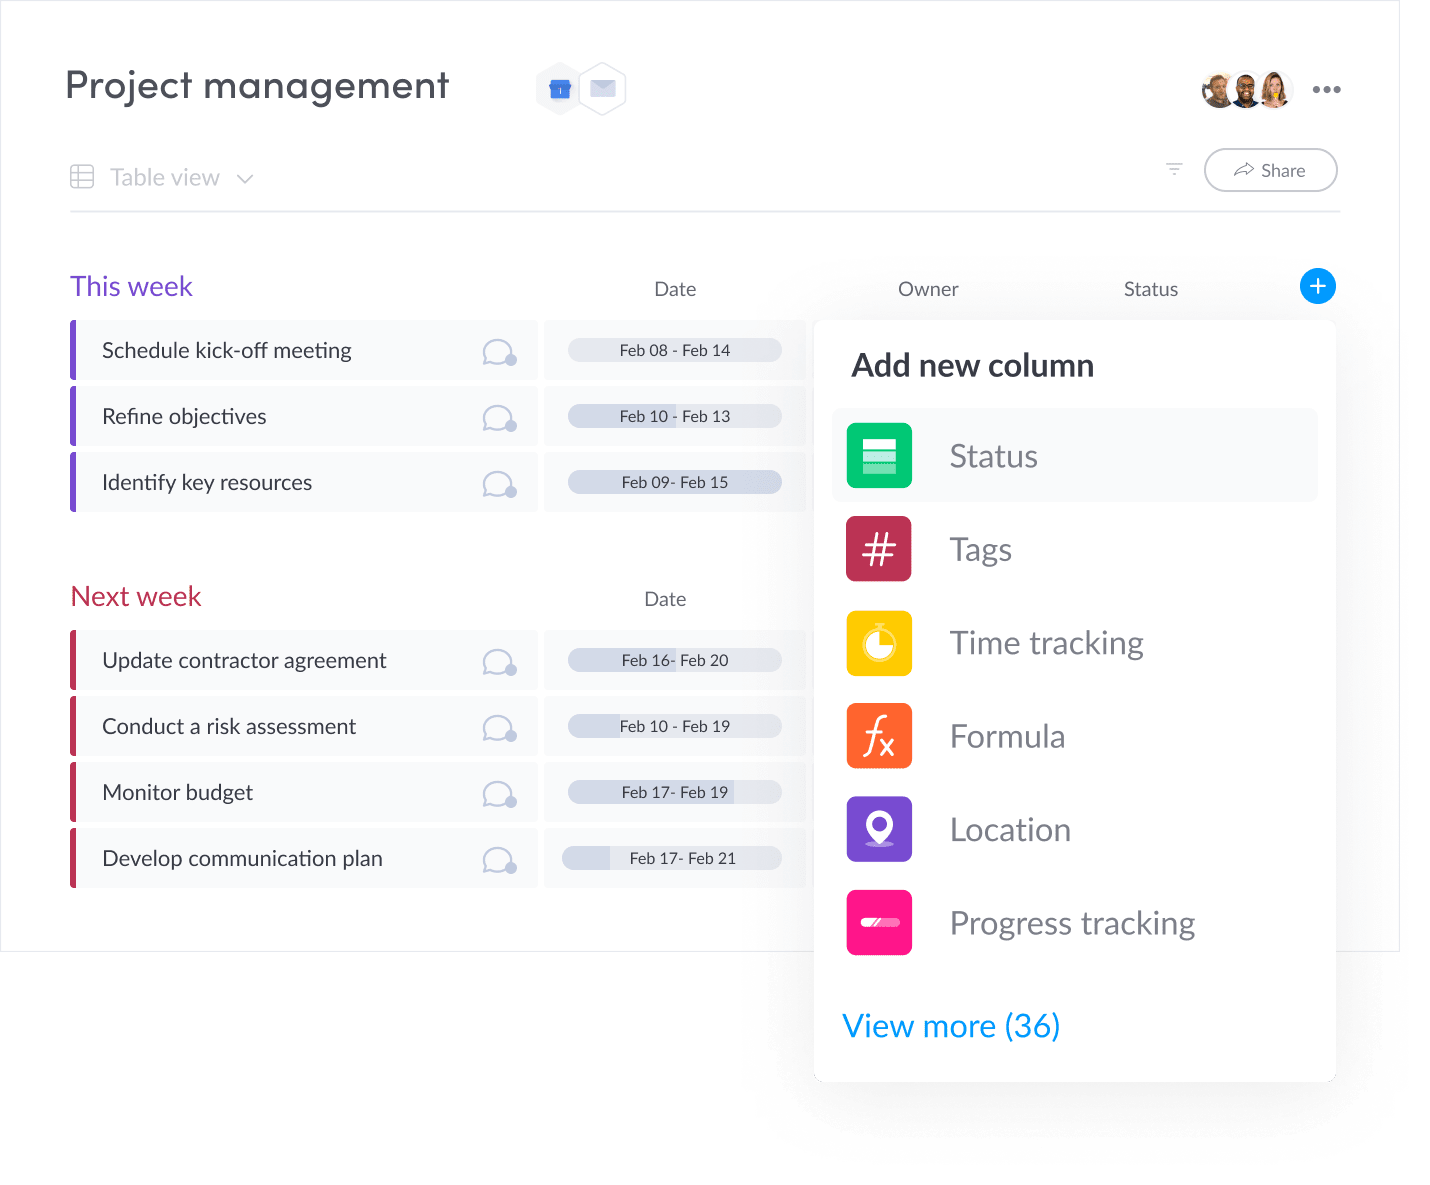 Project Management board with the column menu opened on the right